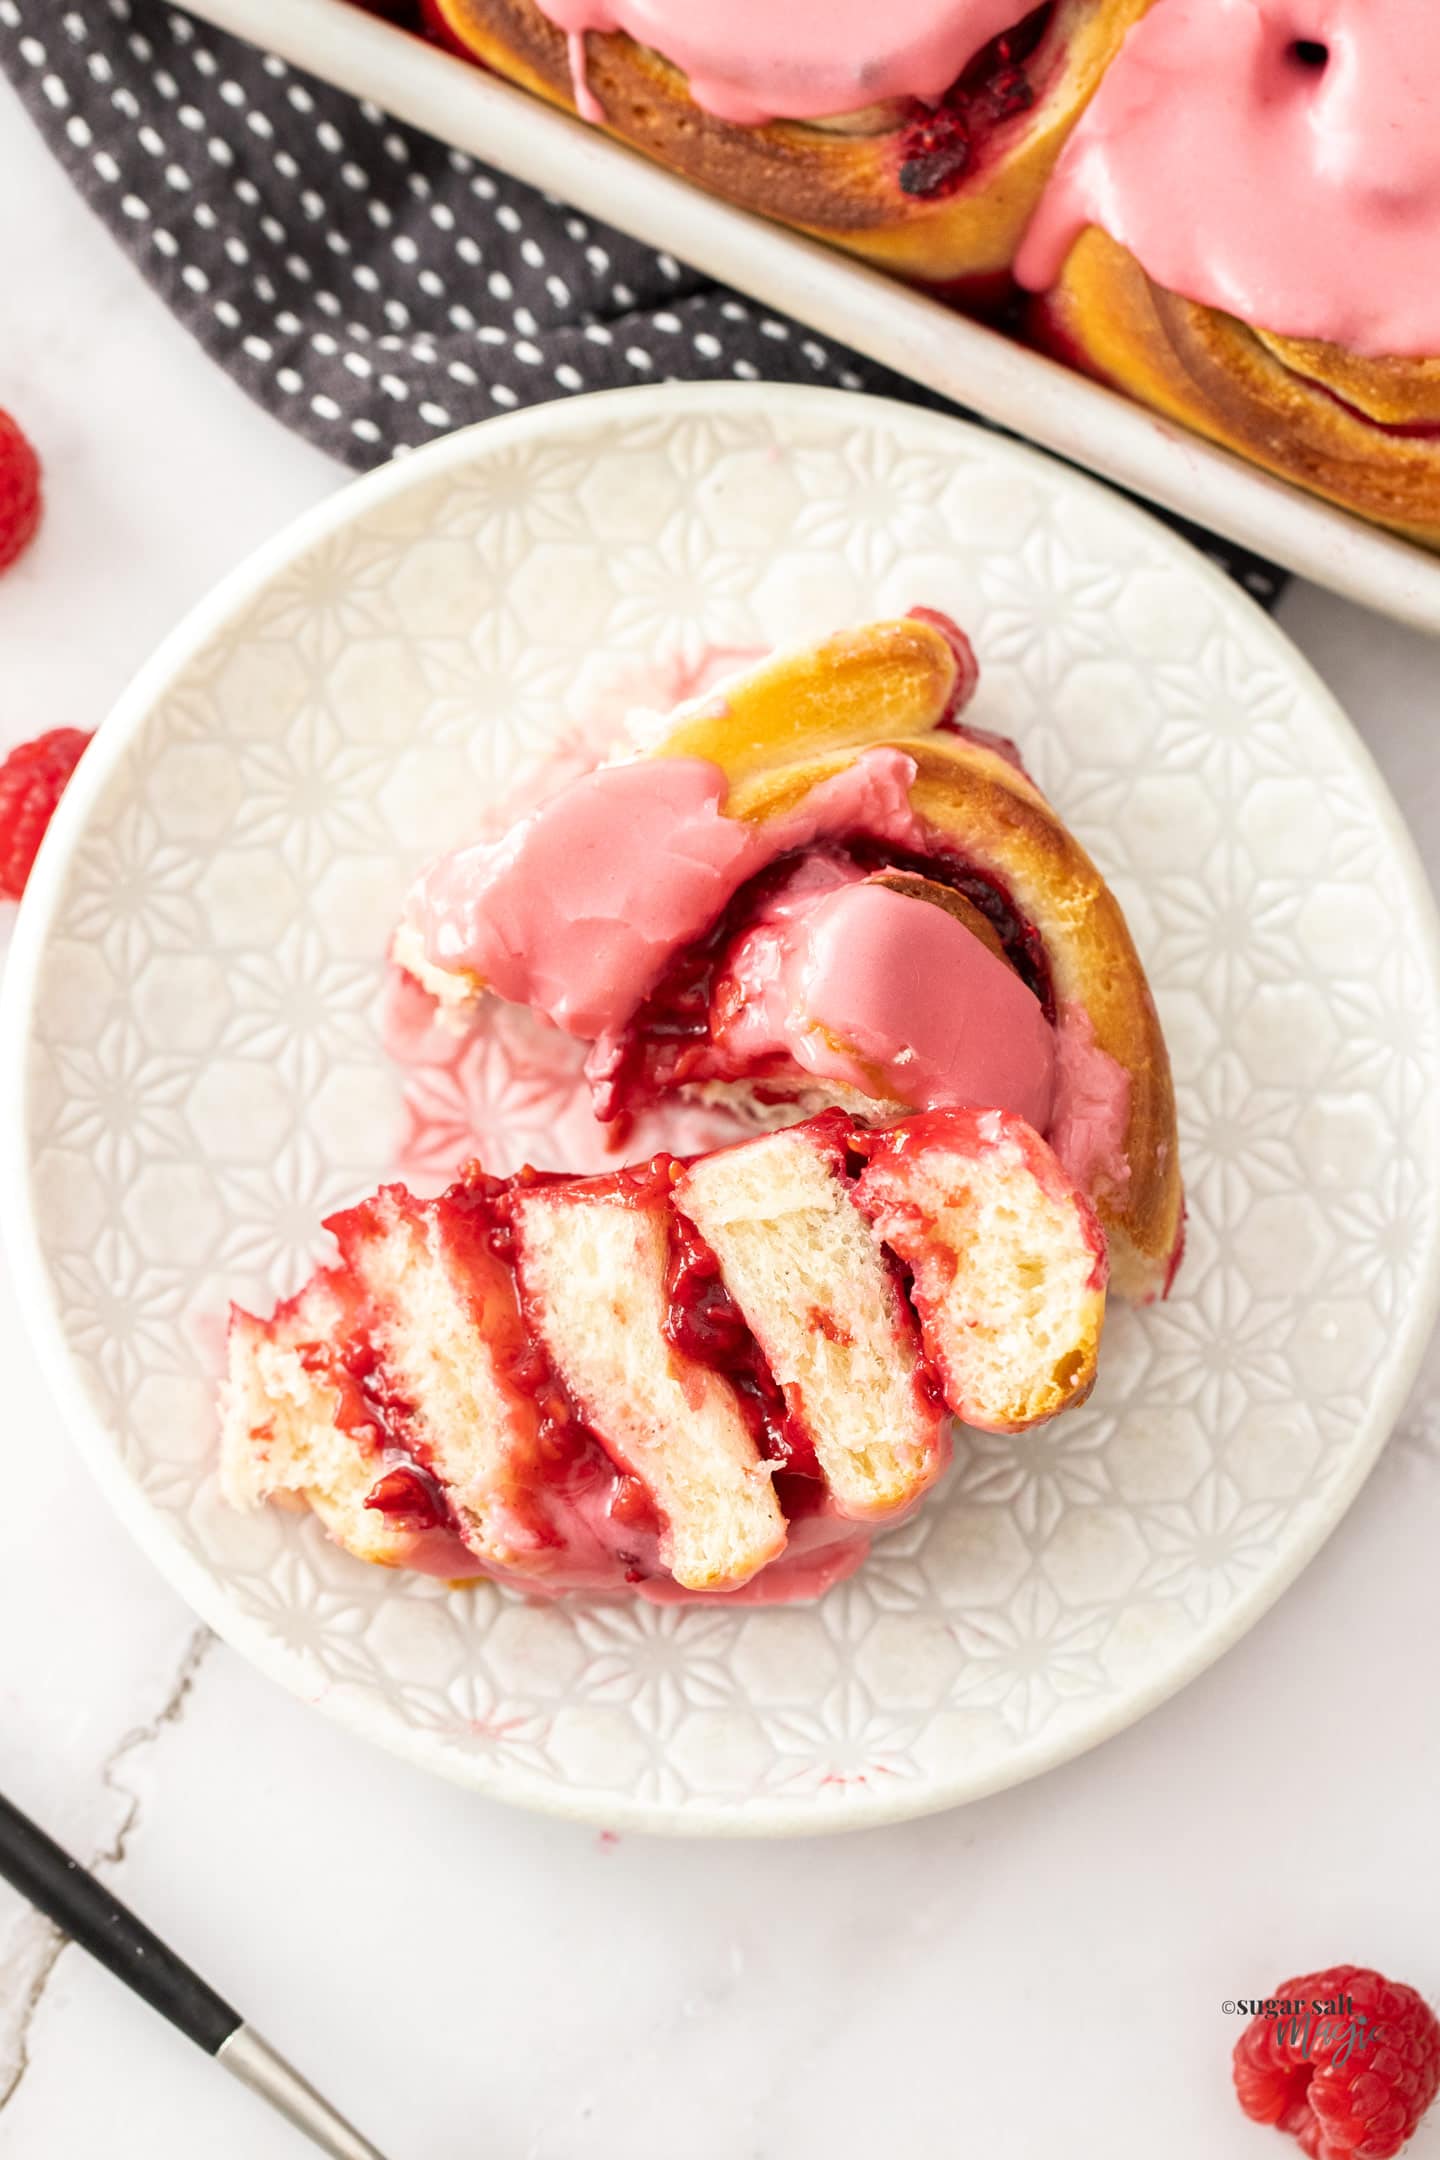 A raspberry sweet roll that's been cut open to show the inside.